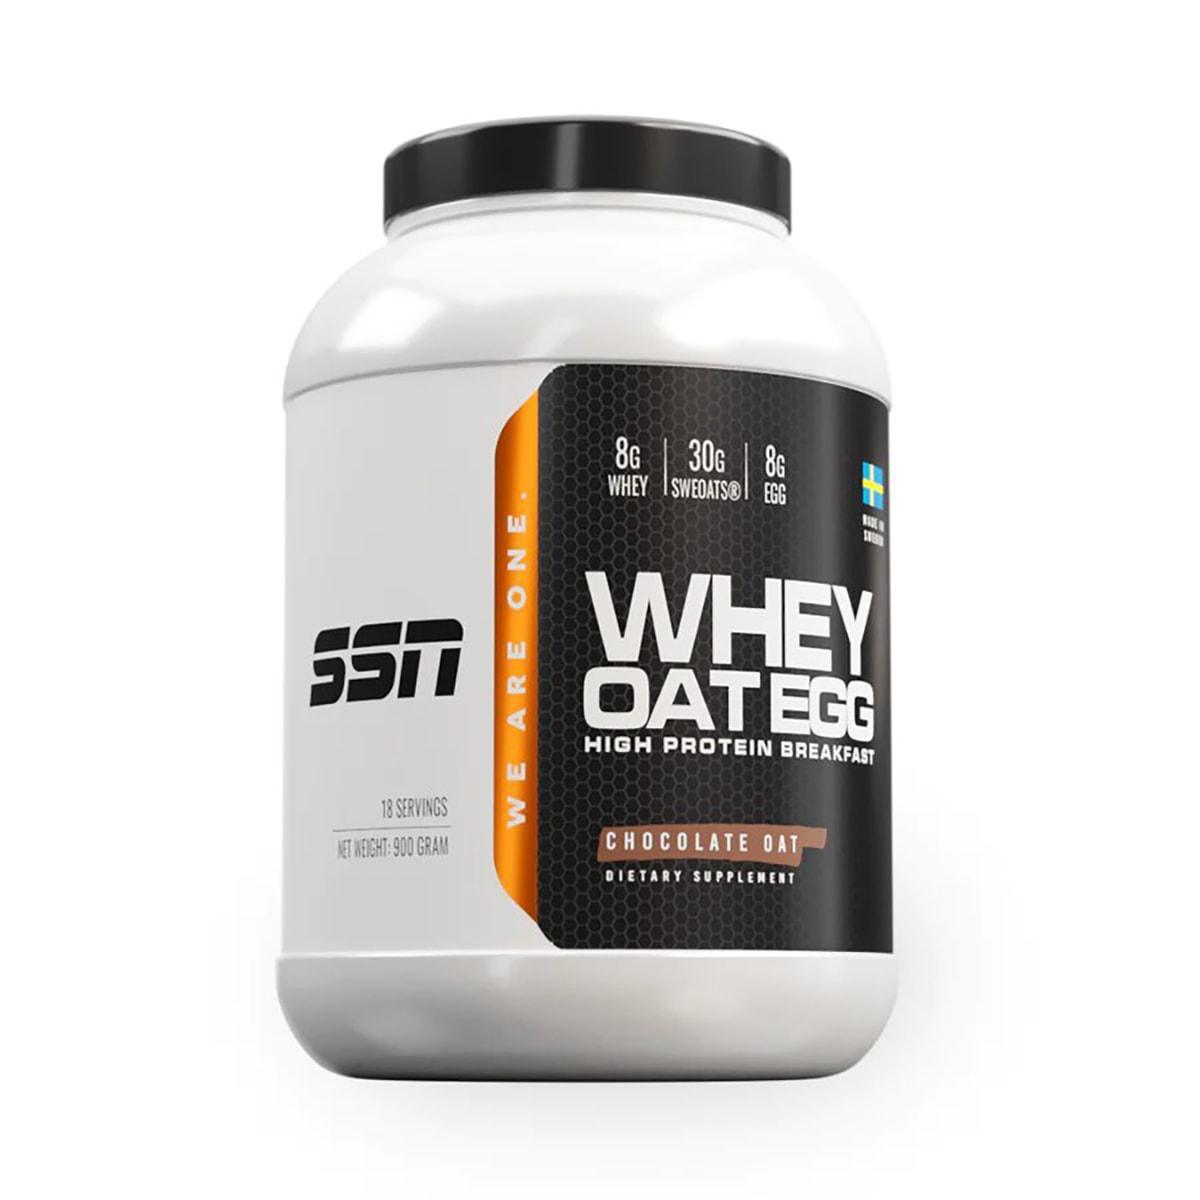 SSN Whey Oat Egg 900g Gainers